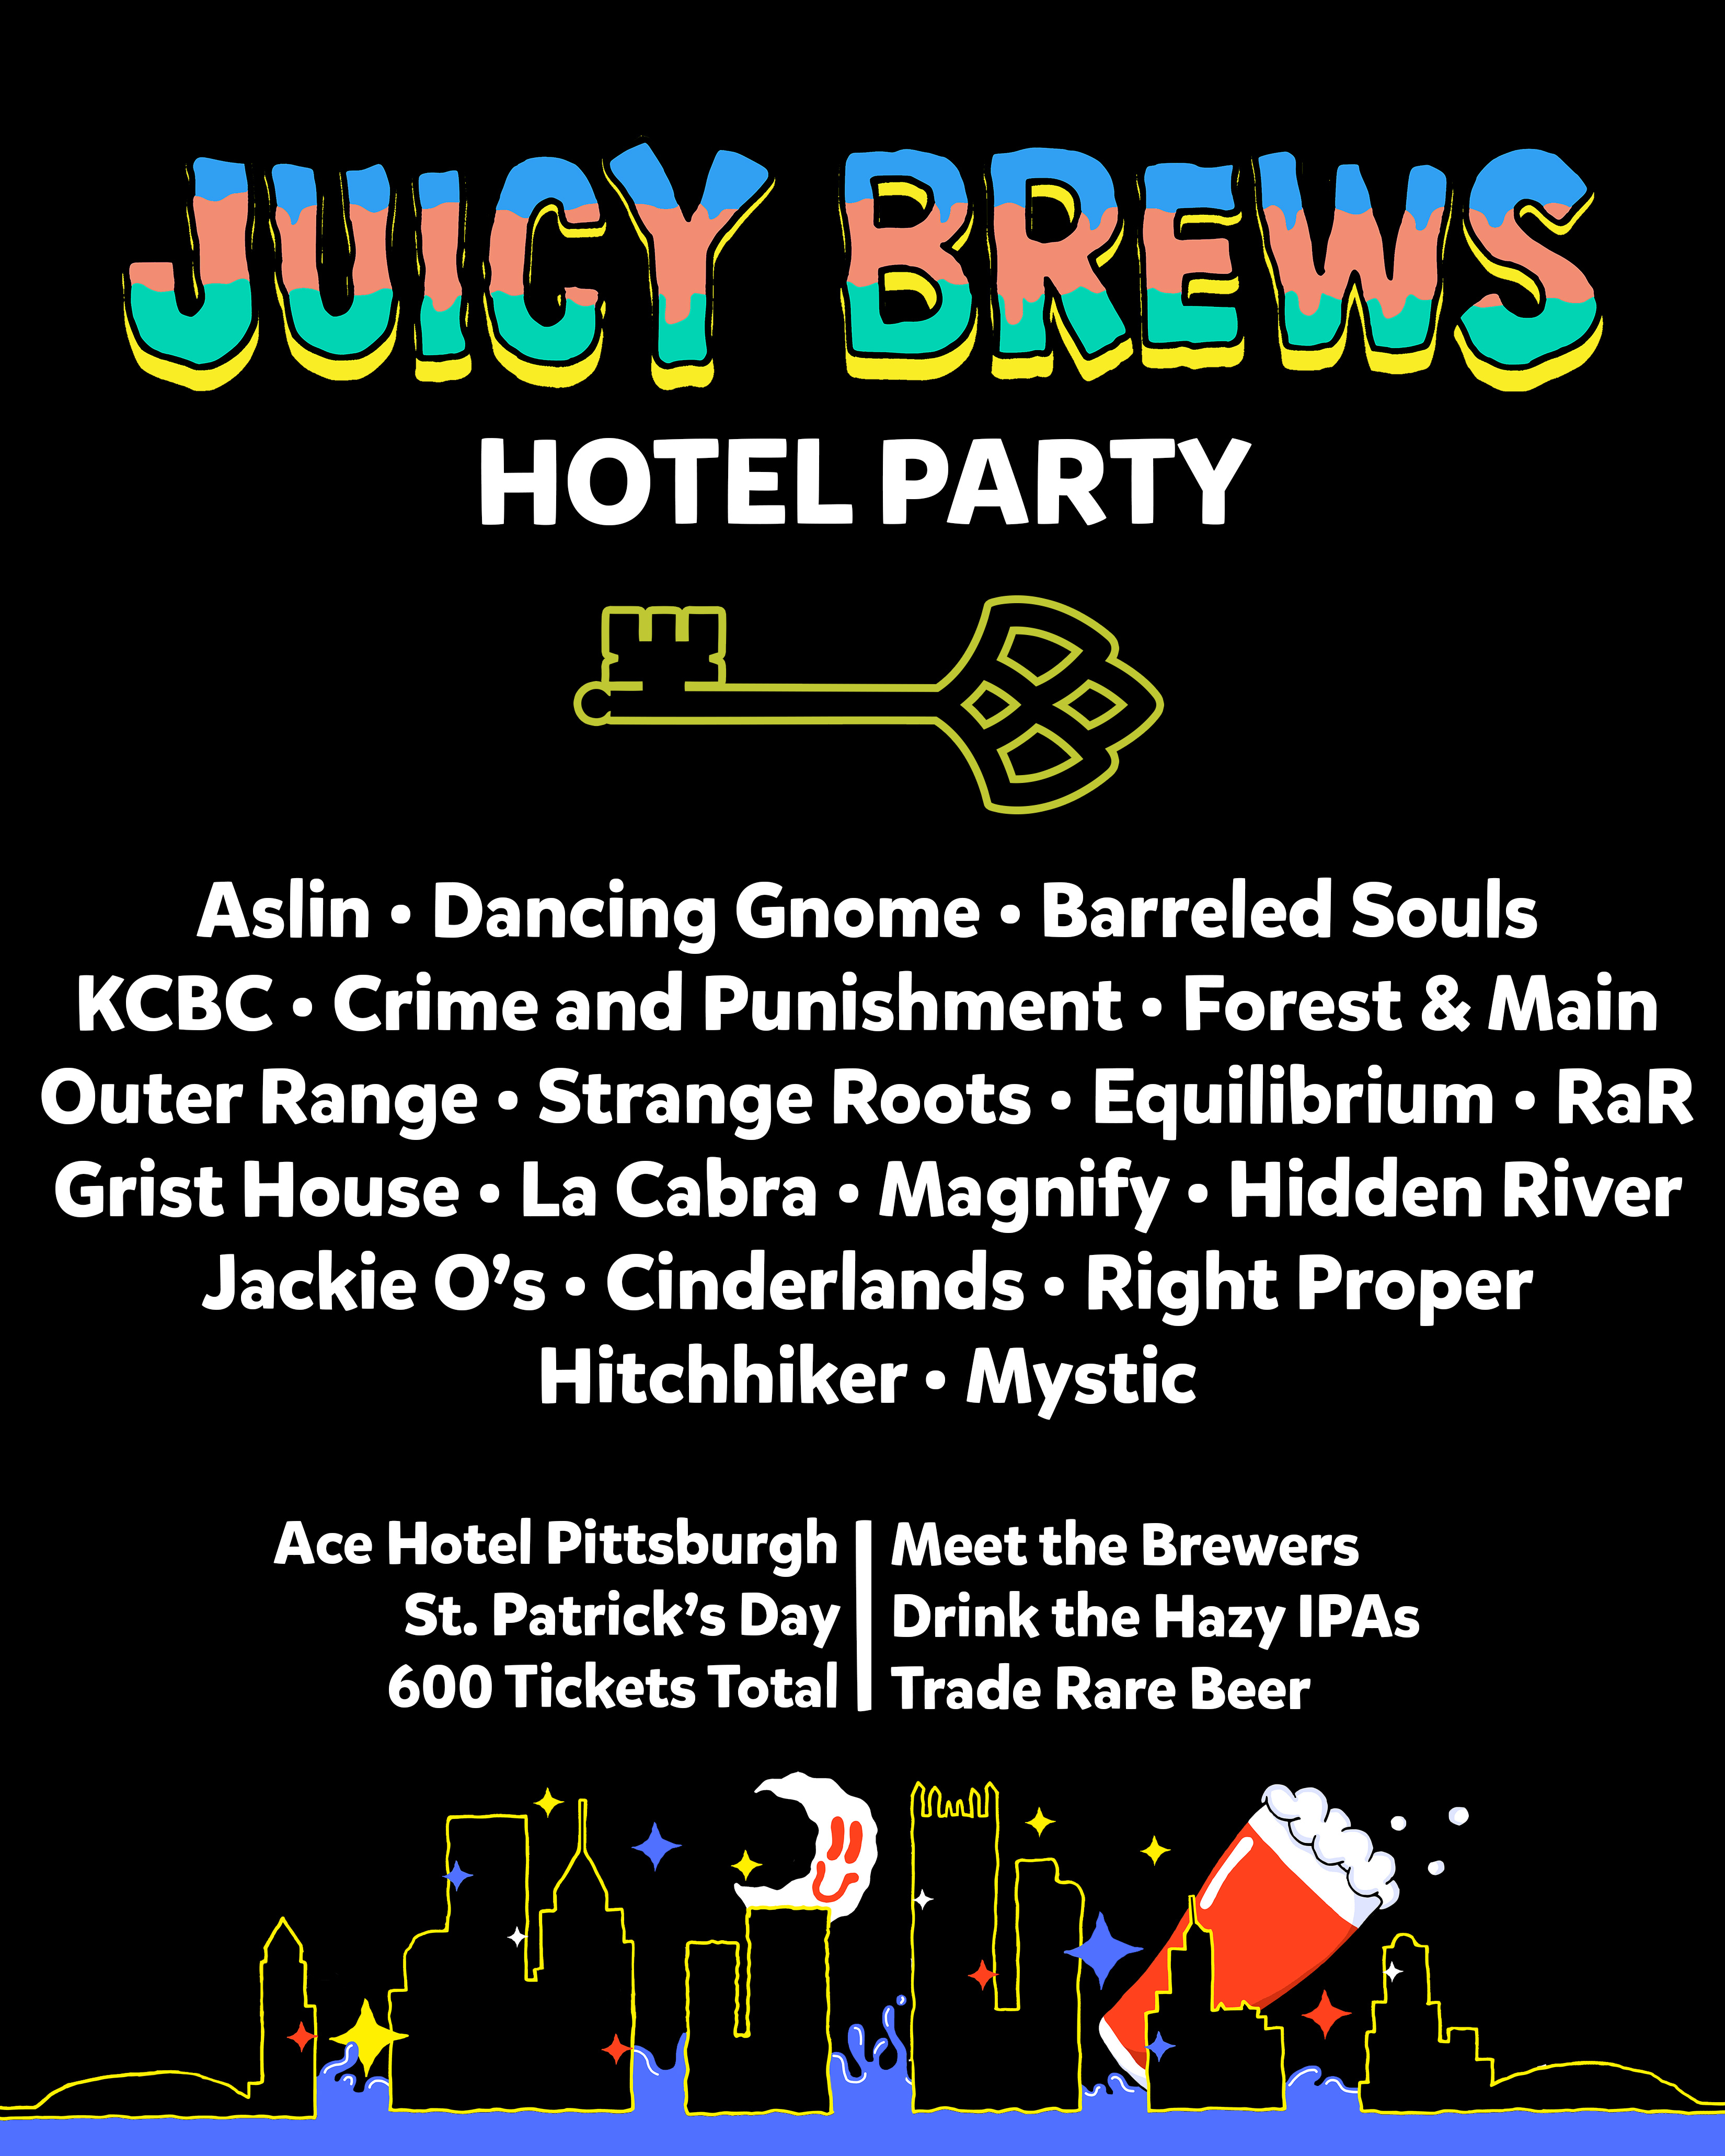 Here’s What to Drink at Juicy Brews Hotel Party